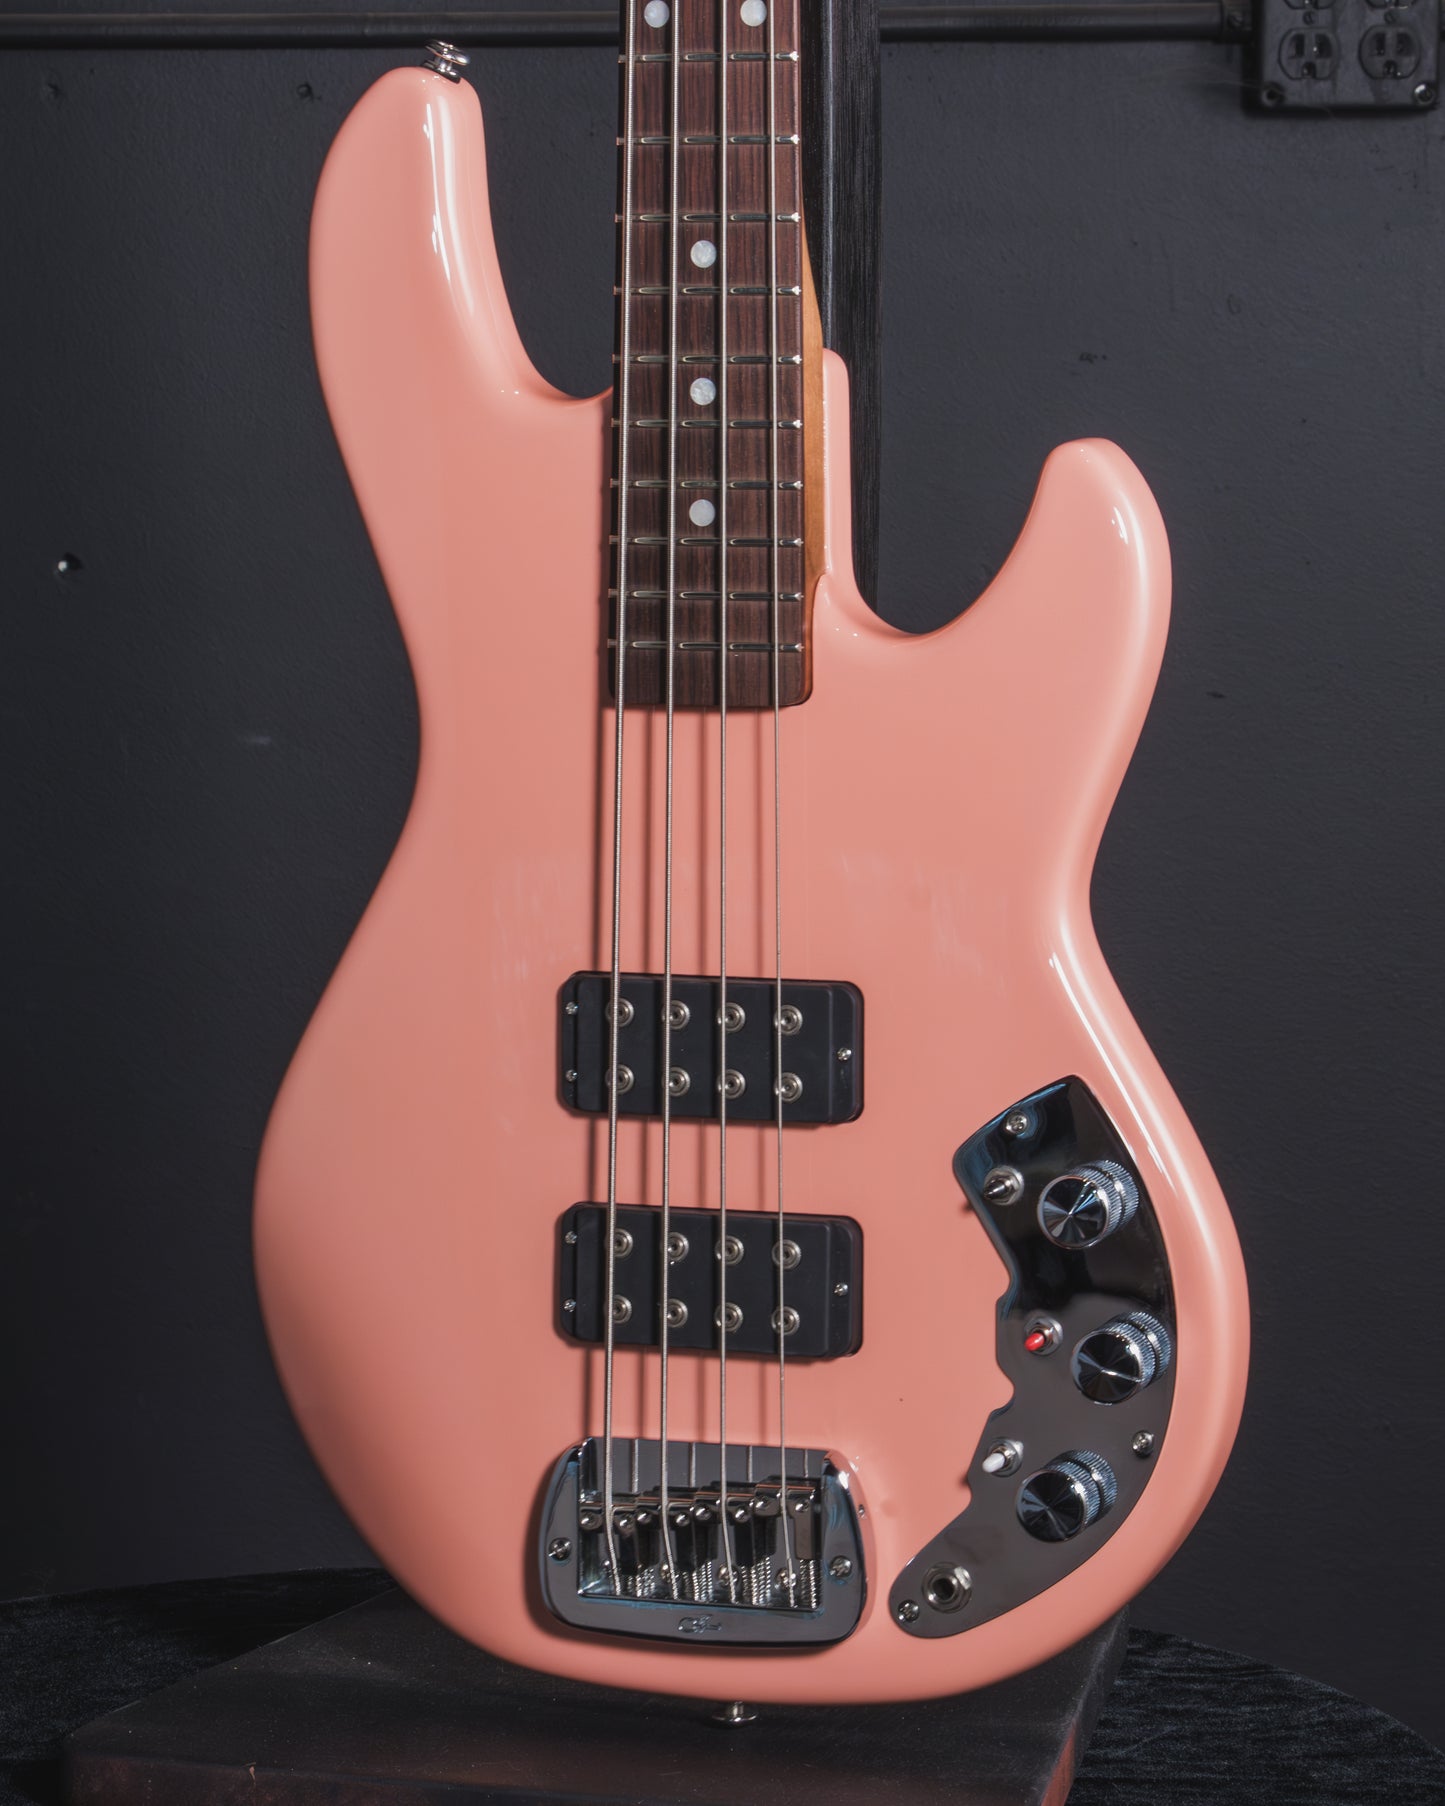 B-Stock Instruments - CLF L-2000 - Sunset Coral - MP (Sample Color)